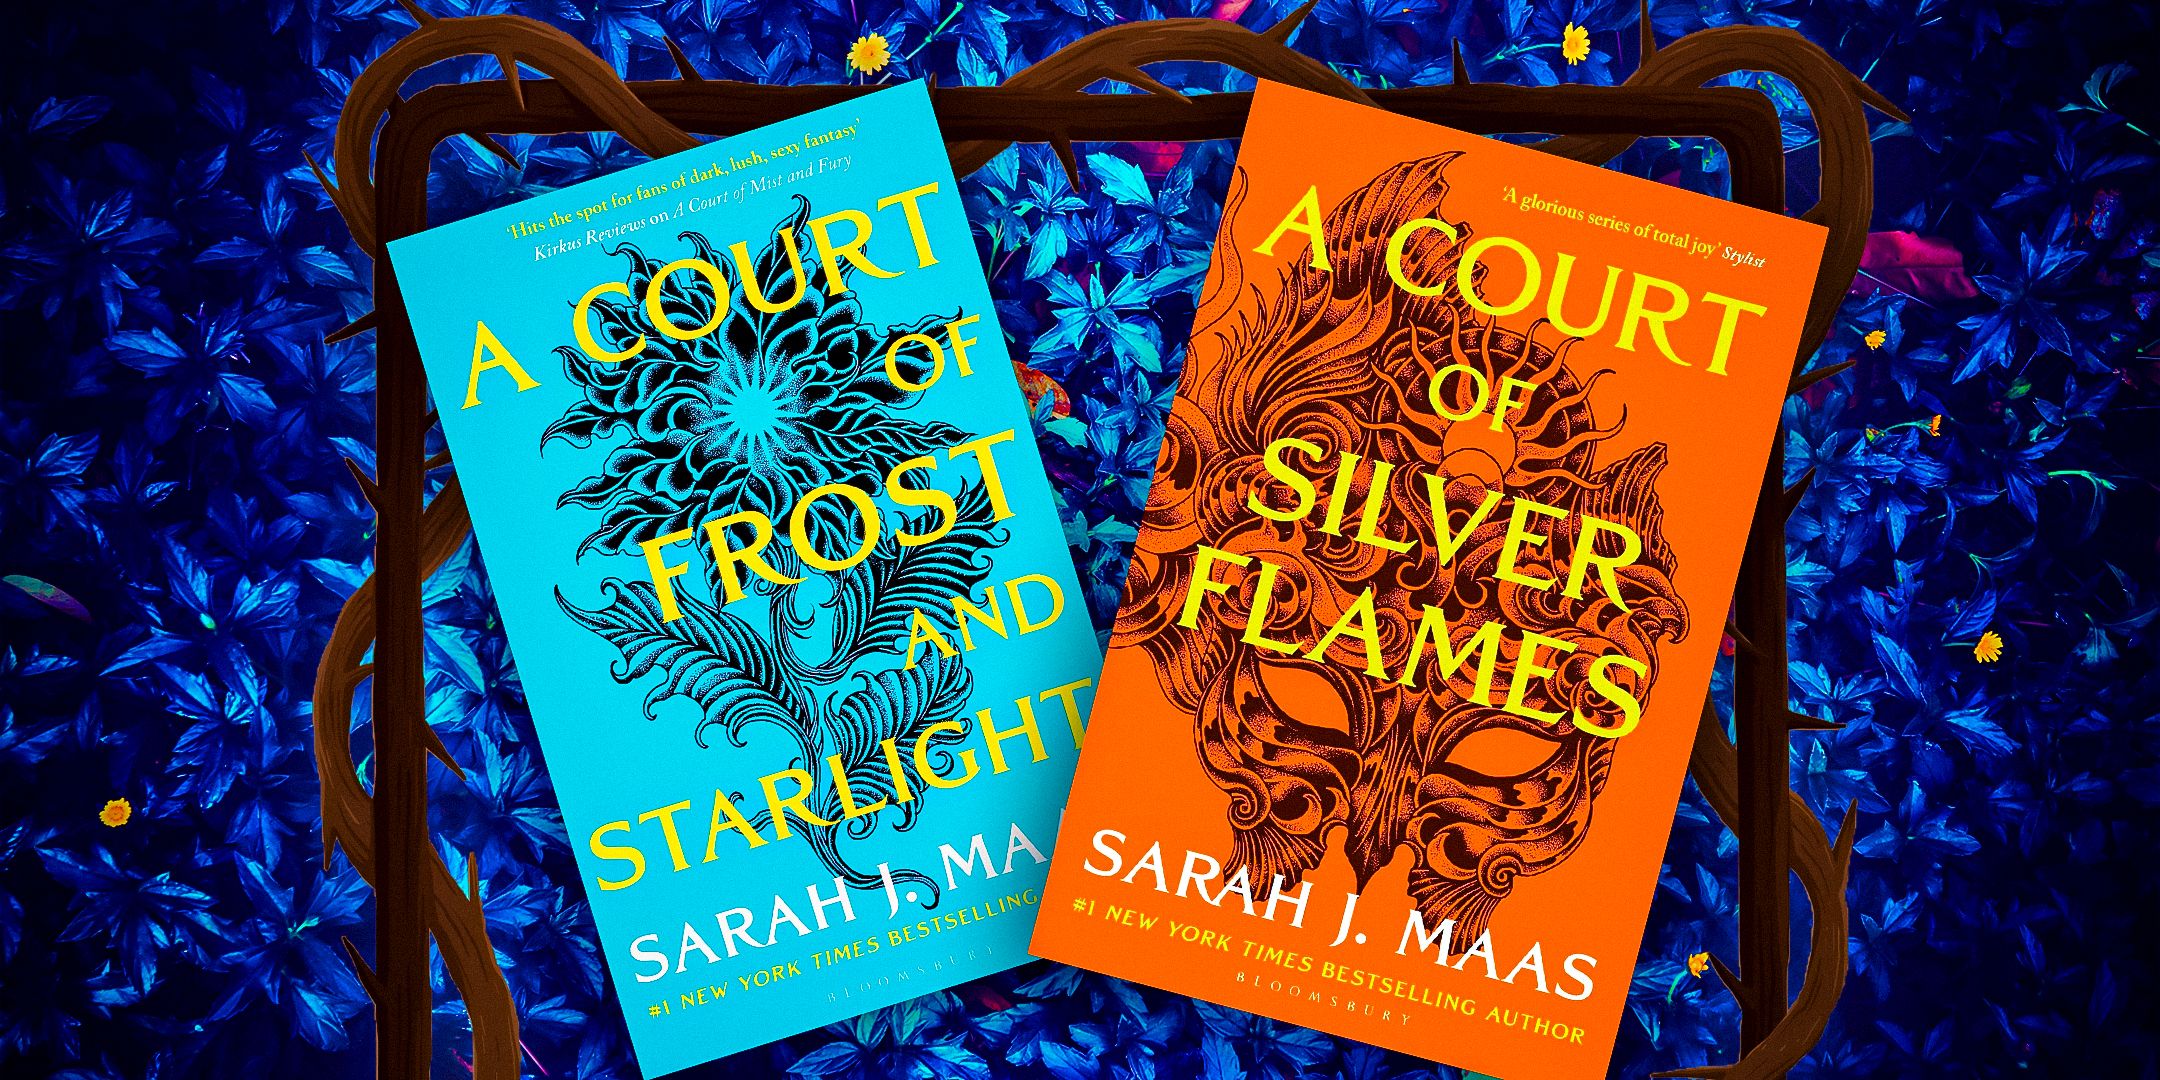 The book covers for A Court of Frost & Starlight and A Court of Silver Flames with blue flowers as a background